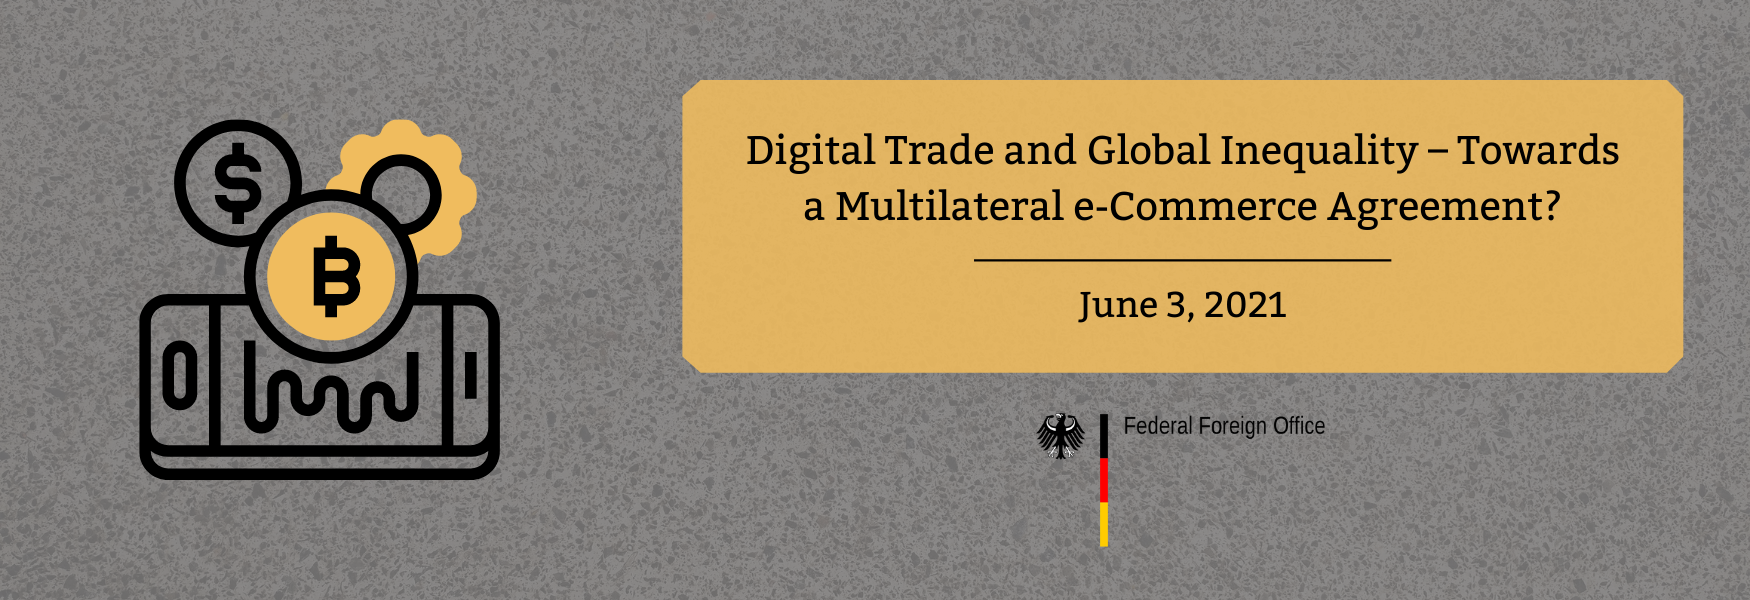 Digital Trade and Global Inequality – Towards a Multilateral e-Commerce Agreement?